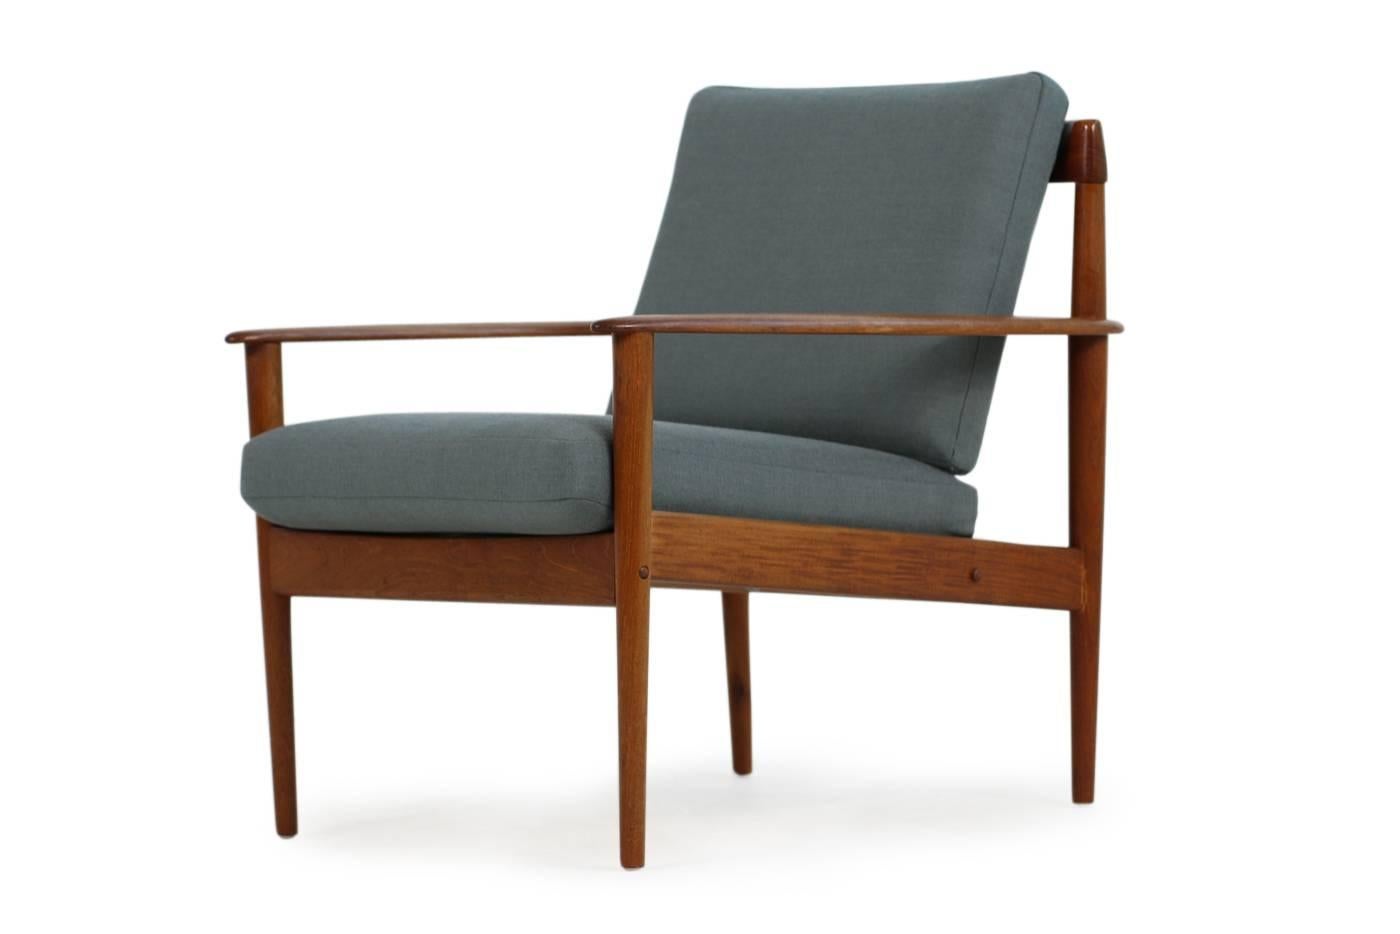 Beautiful and rare 1950s Grete Jalk Lounge Chair, Mod. PJ (Poul Jeppesen) 56/1 (Model 56) amazing condition, renewed upholstery and covered with new high quality woven fabric in a fantastic grey tone. This piece is very rare, hard to find in that